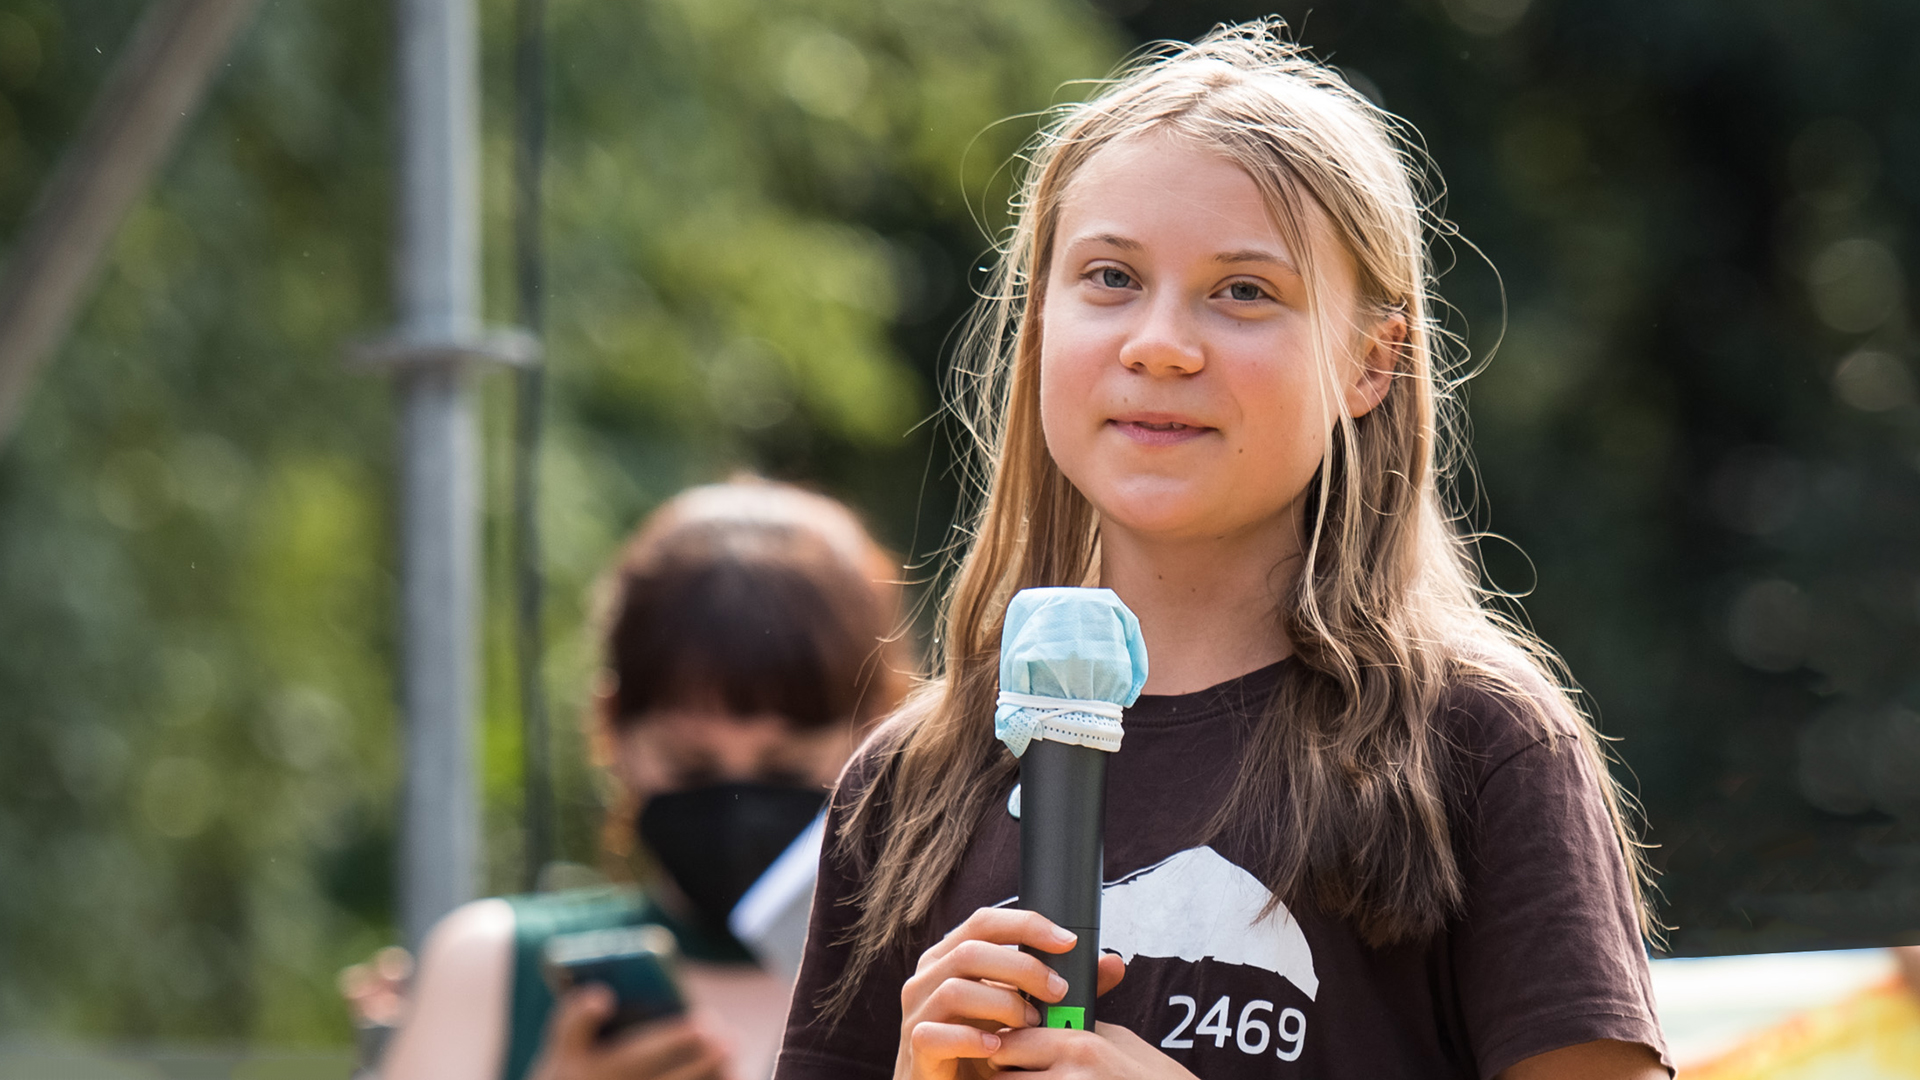 Greta Thunberg to march at Glasgow climate protest - BBC News